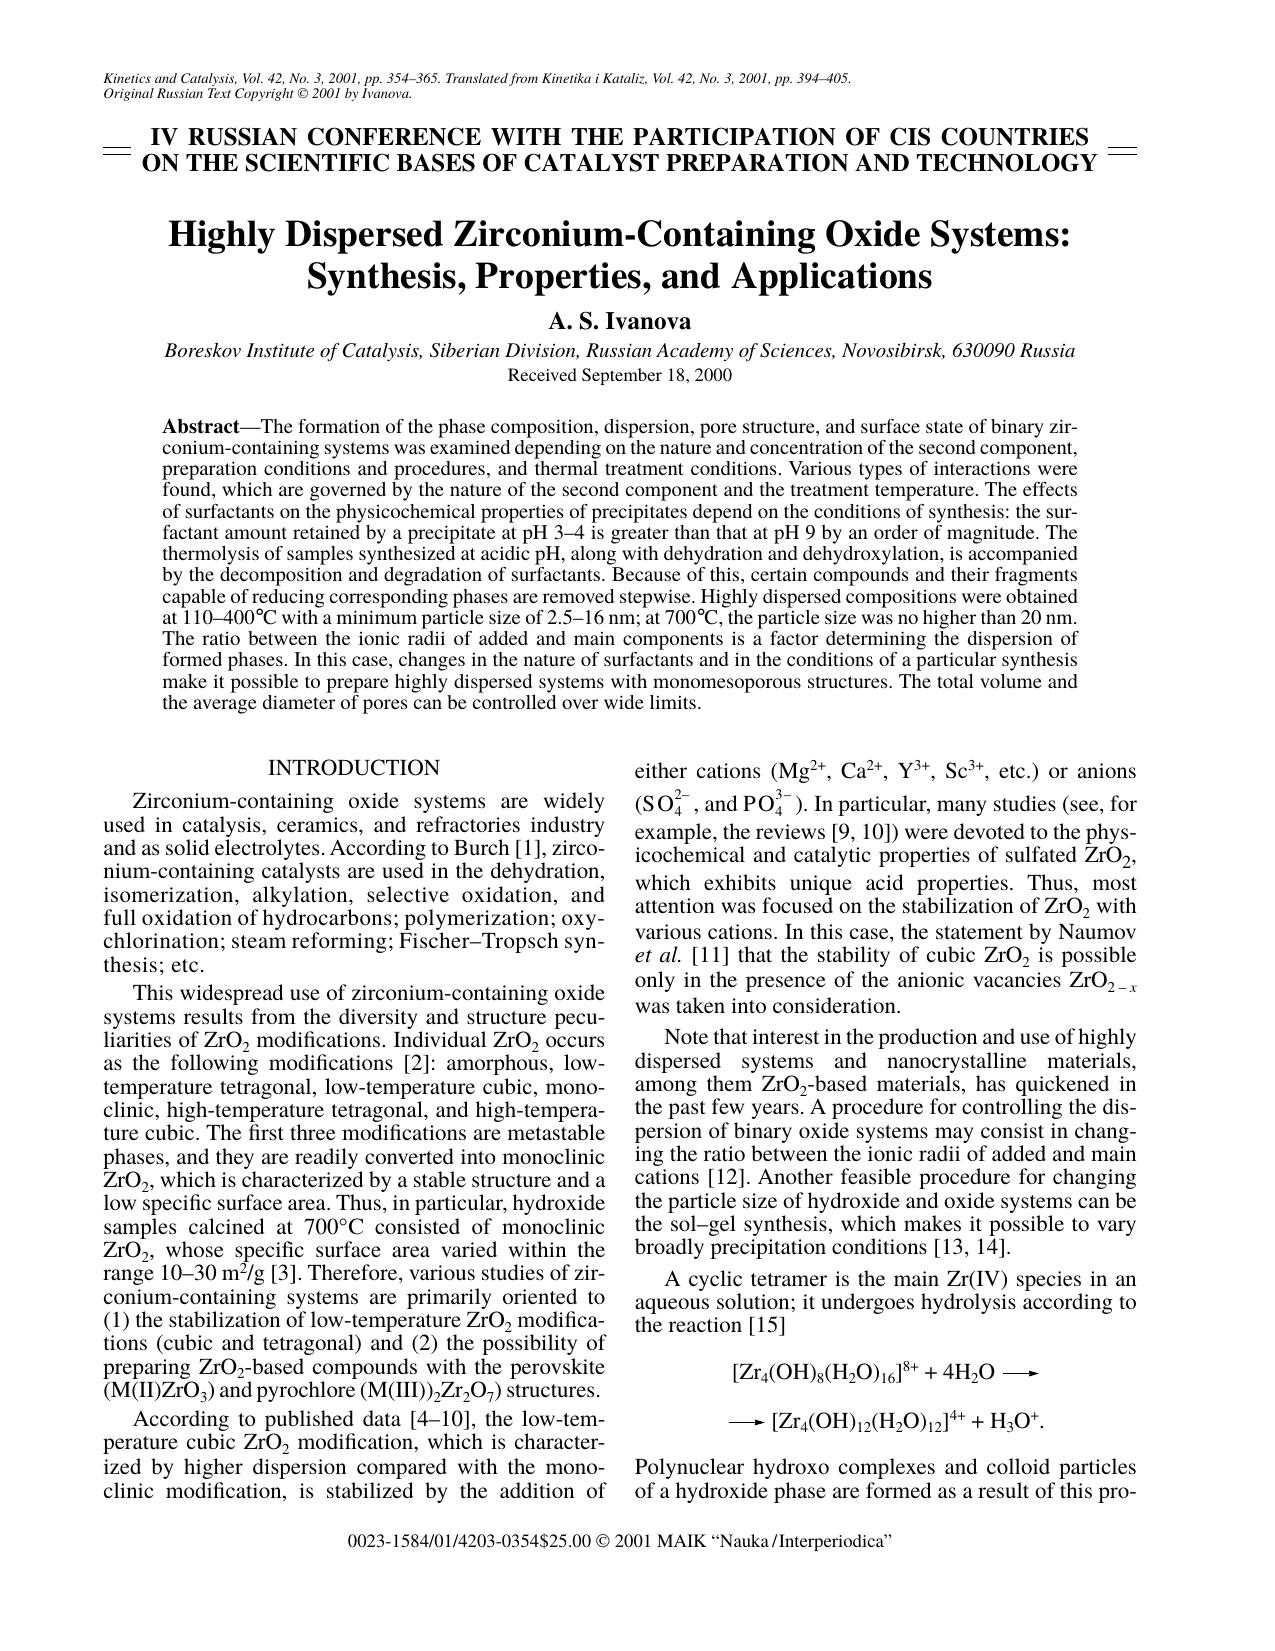 Highly Dispersed Zirconium-Containing Oxide Systems: Synthesis, Properties, and Applications by Unknown